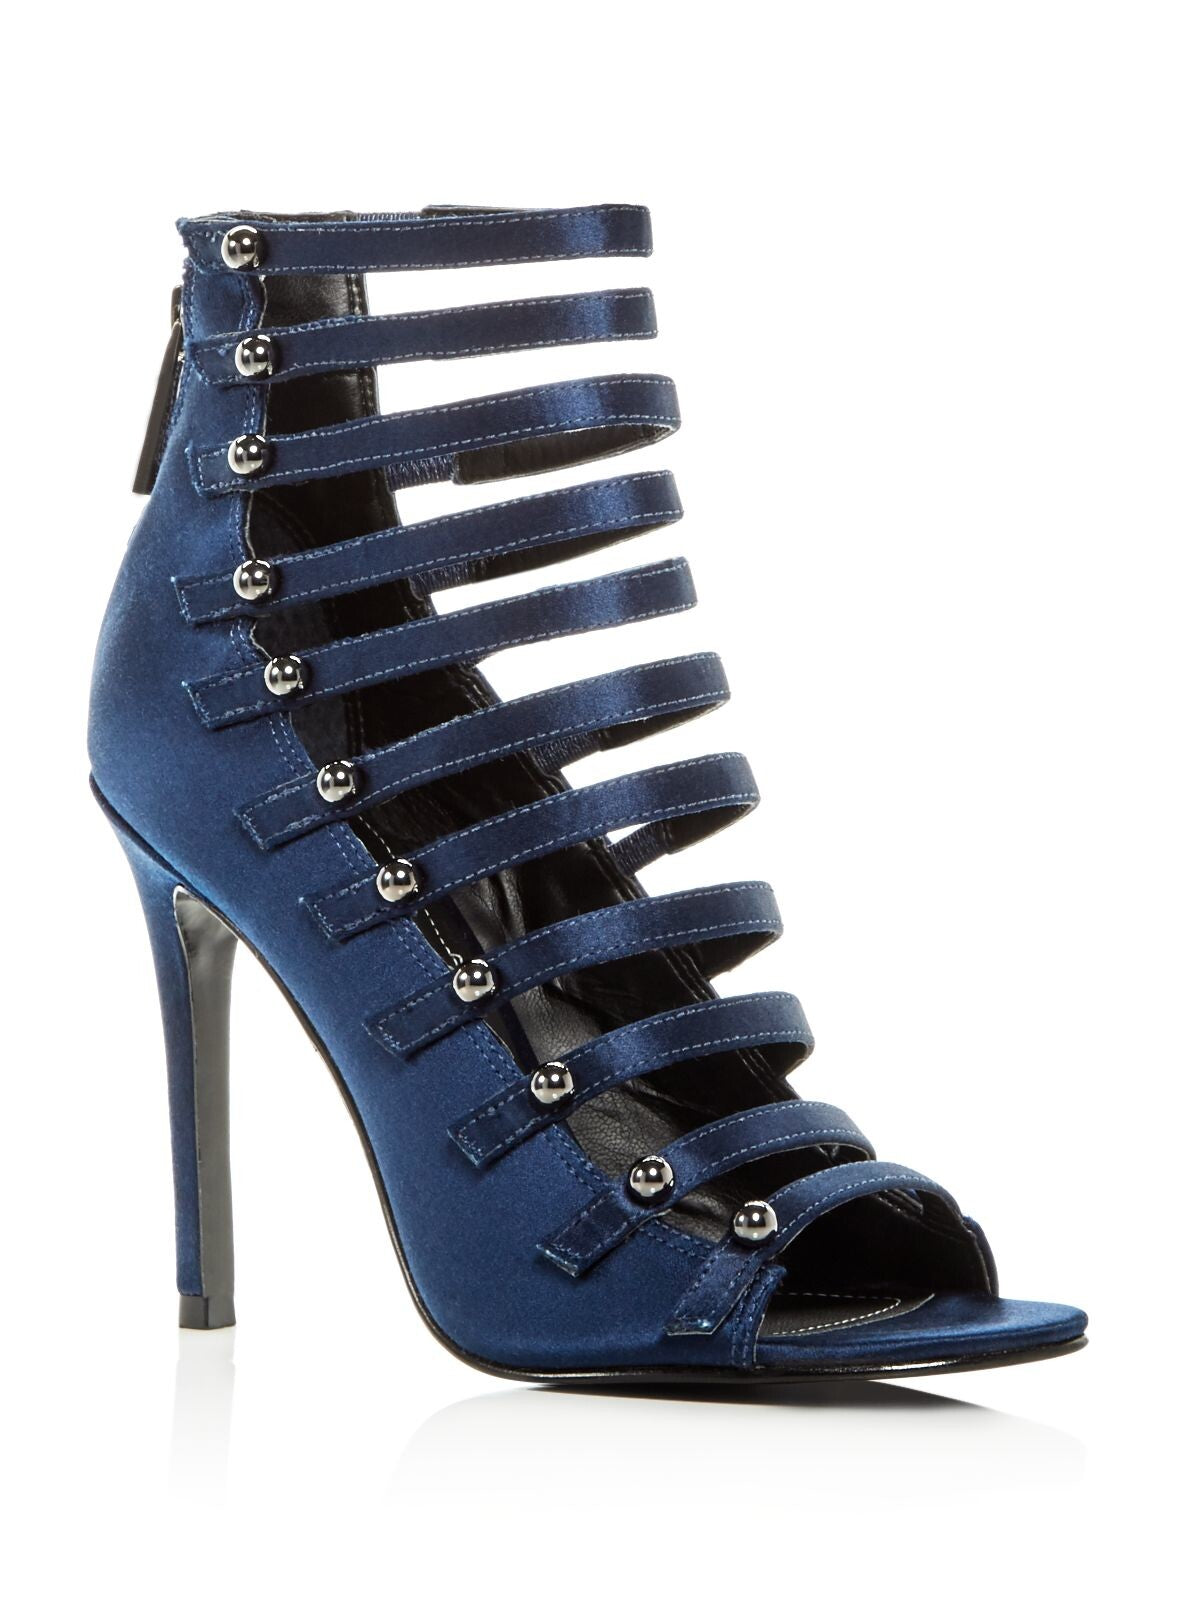 KENDALL + KYLIE Womens Navy Caged Design Strappy Studded Gia Round Toe Stiletto Zip-Up Dress Sandals Shoes 7 M